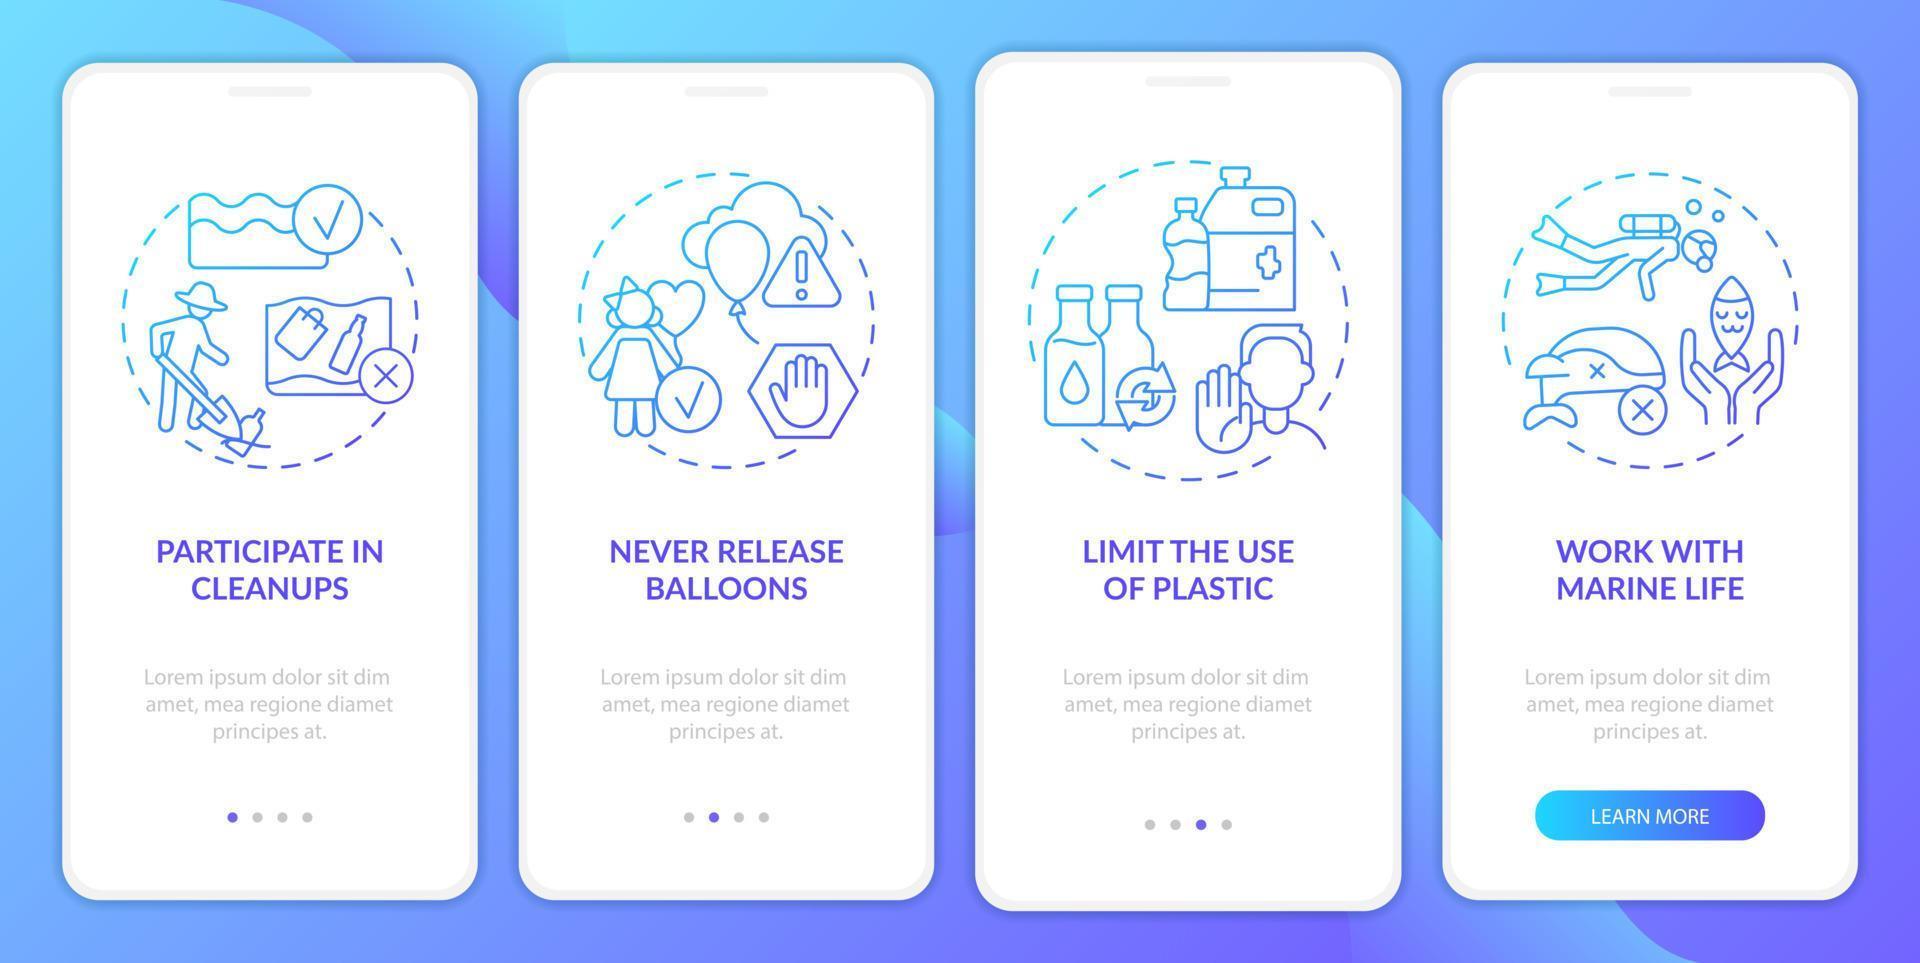 Save ocean from pollution blue gradient onboarding mobile app screen. Walkthrough 4 steps graphic instructions pages with linear concepts. UI, UX, GUI template. vector